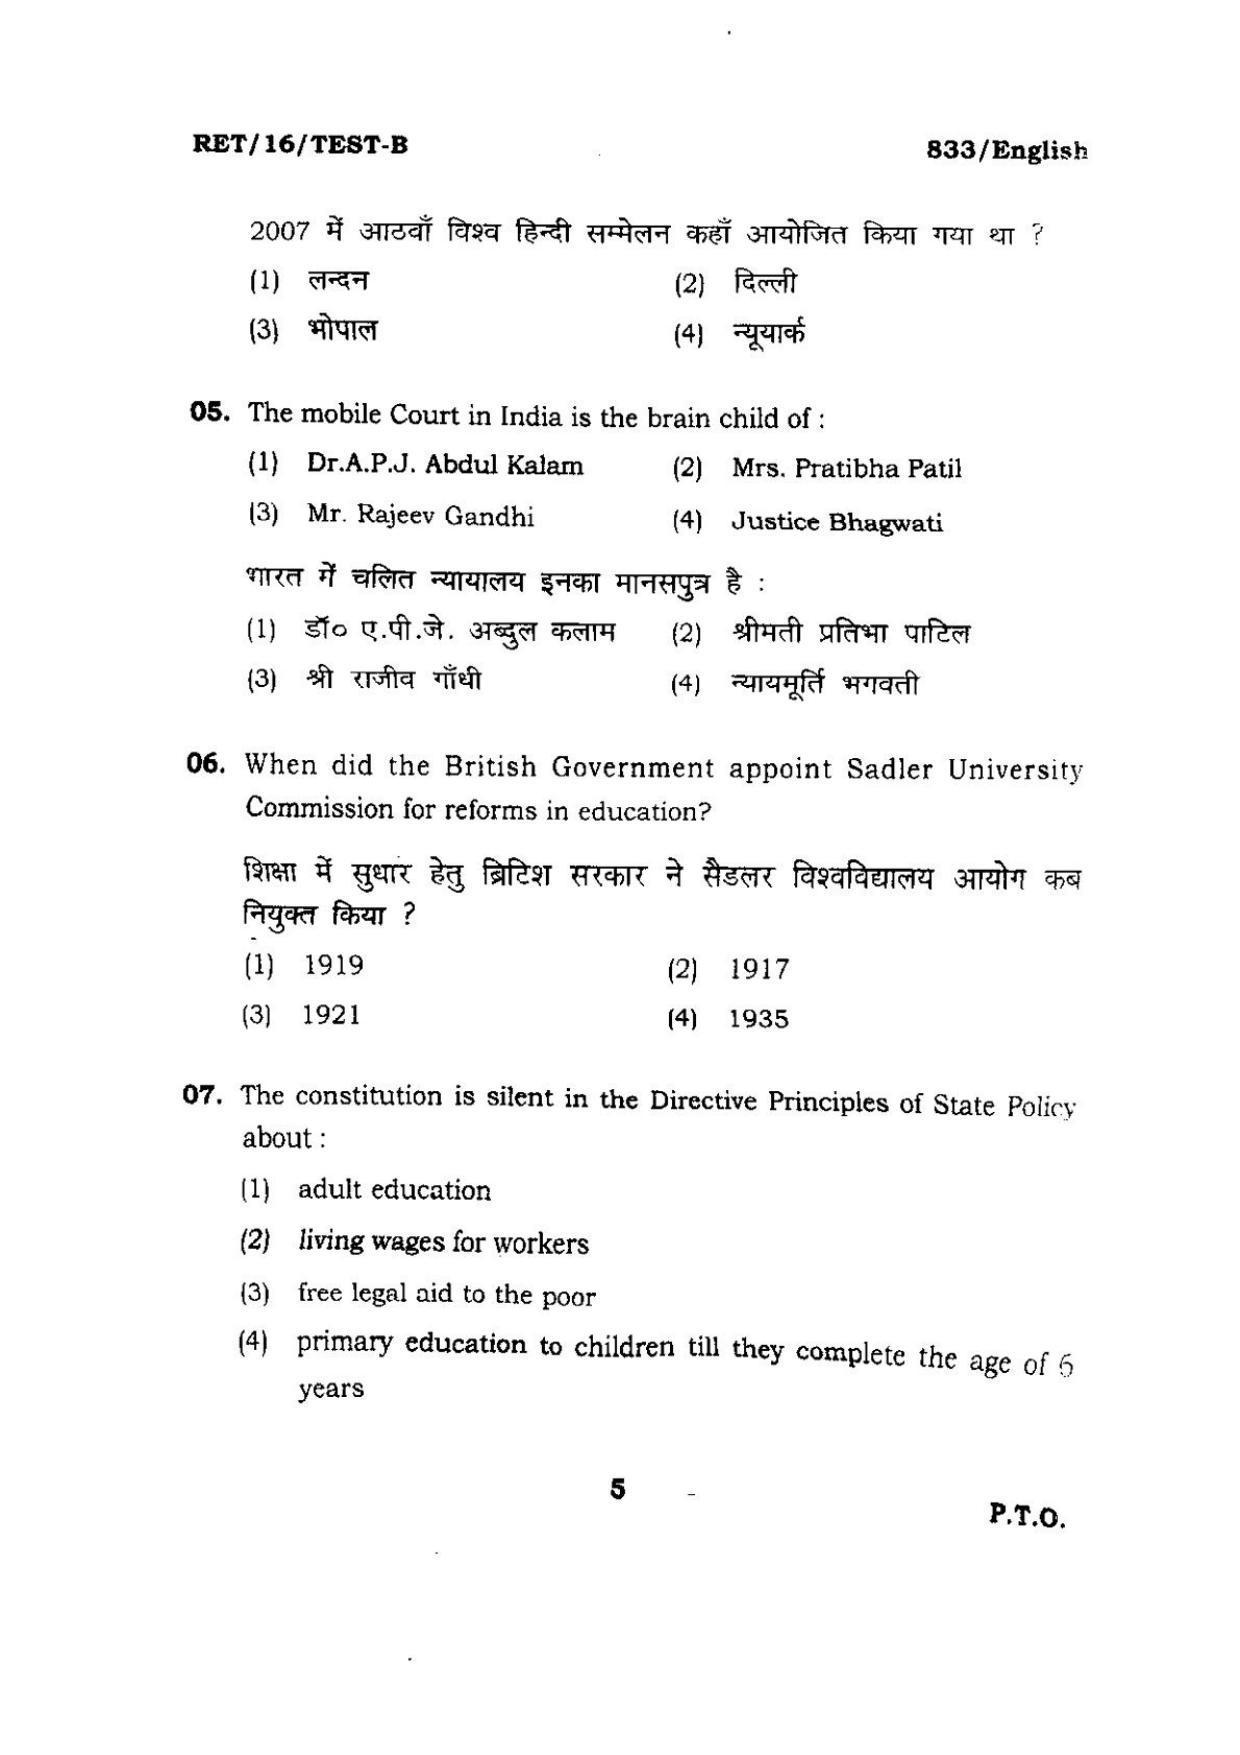 BHU RET ENGLISH 2016 Question Paper - Page 5